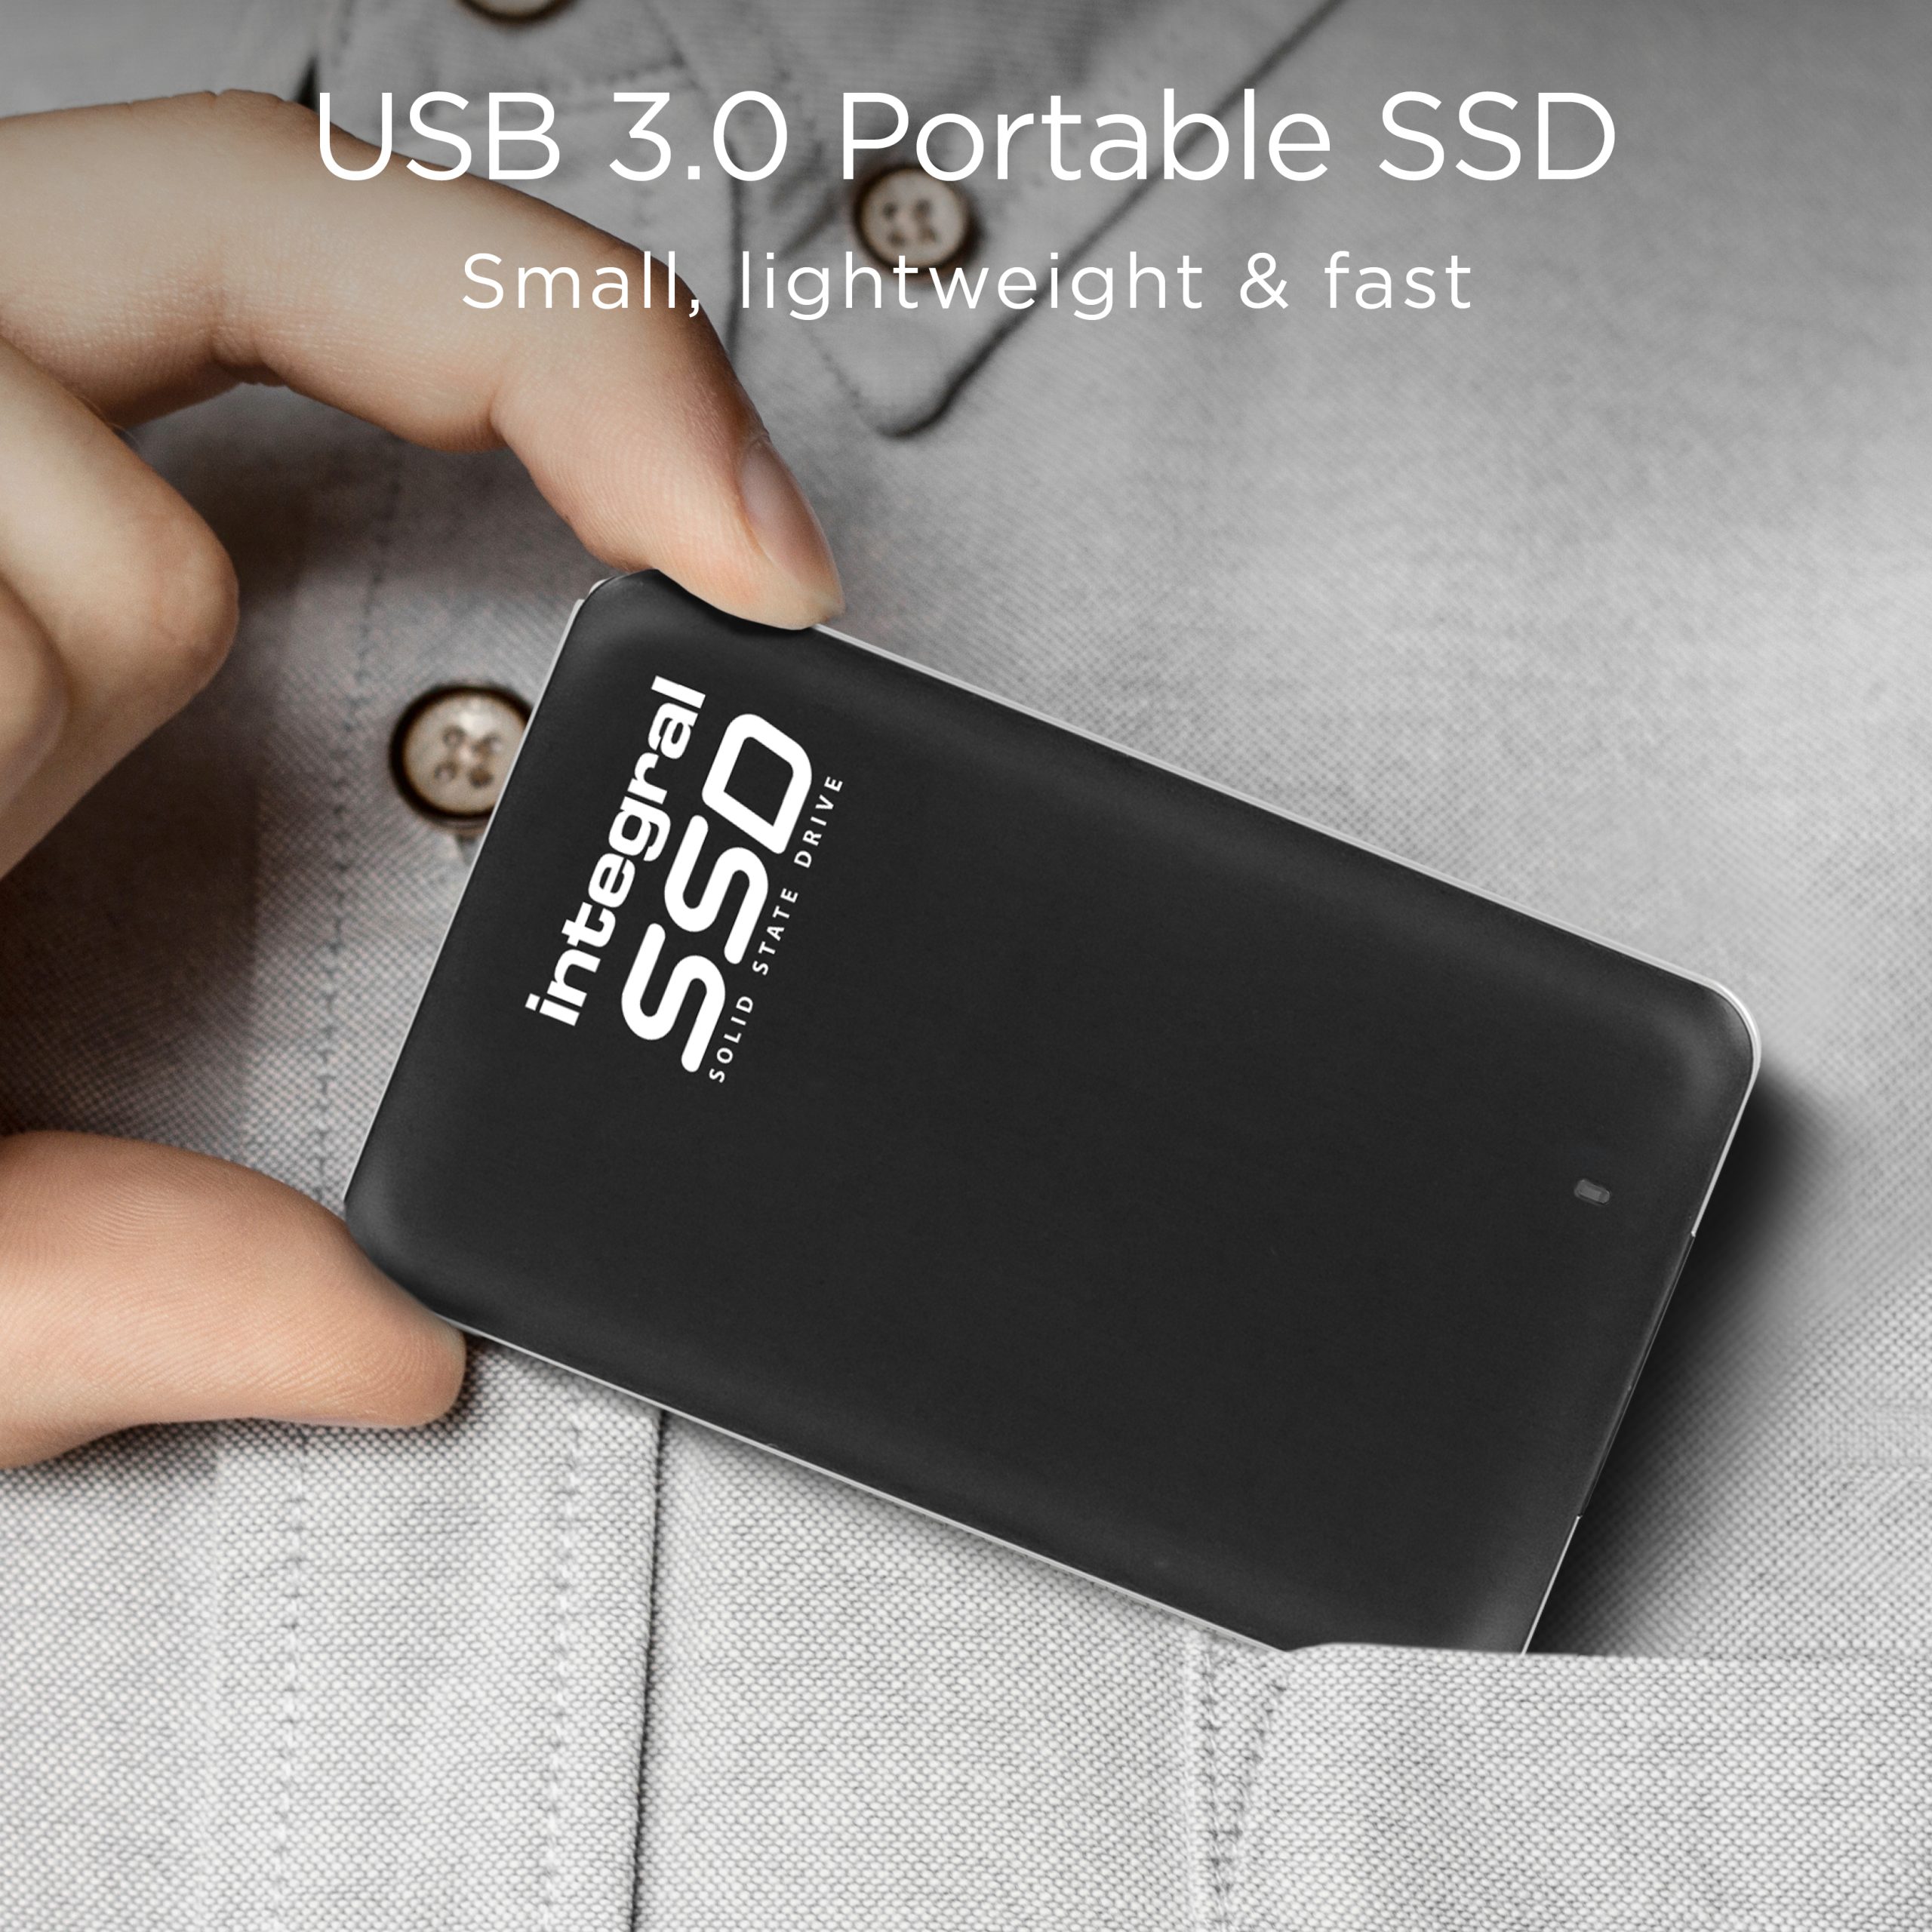 USB 3.0 Portable SSD Small, lightweight and fast